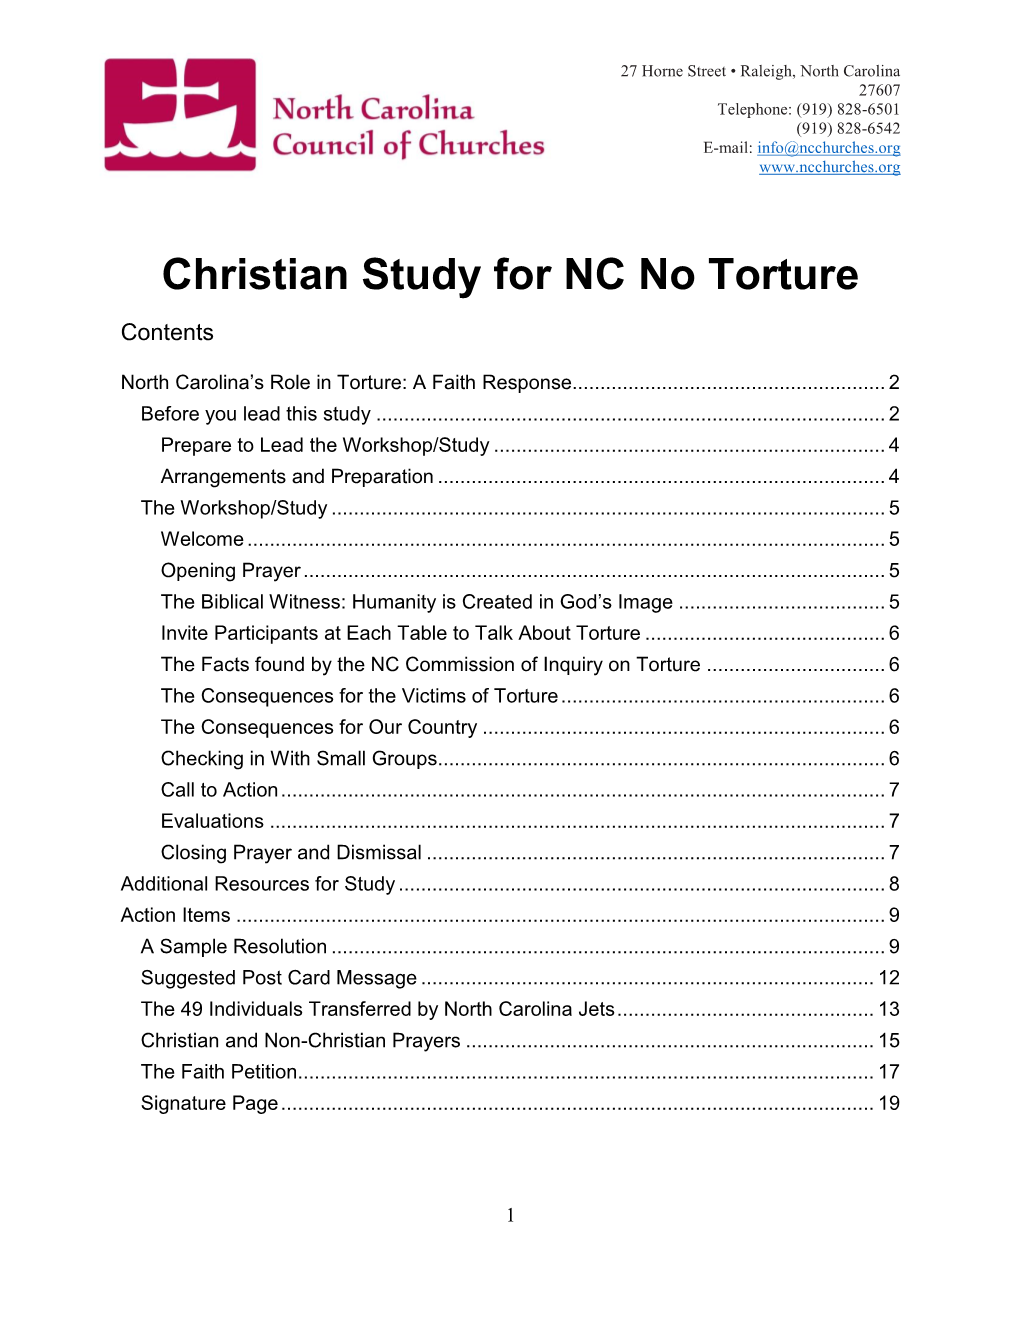 Christian Study for NC No Torture Contents